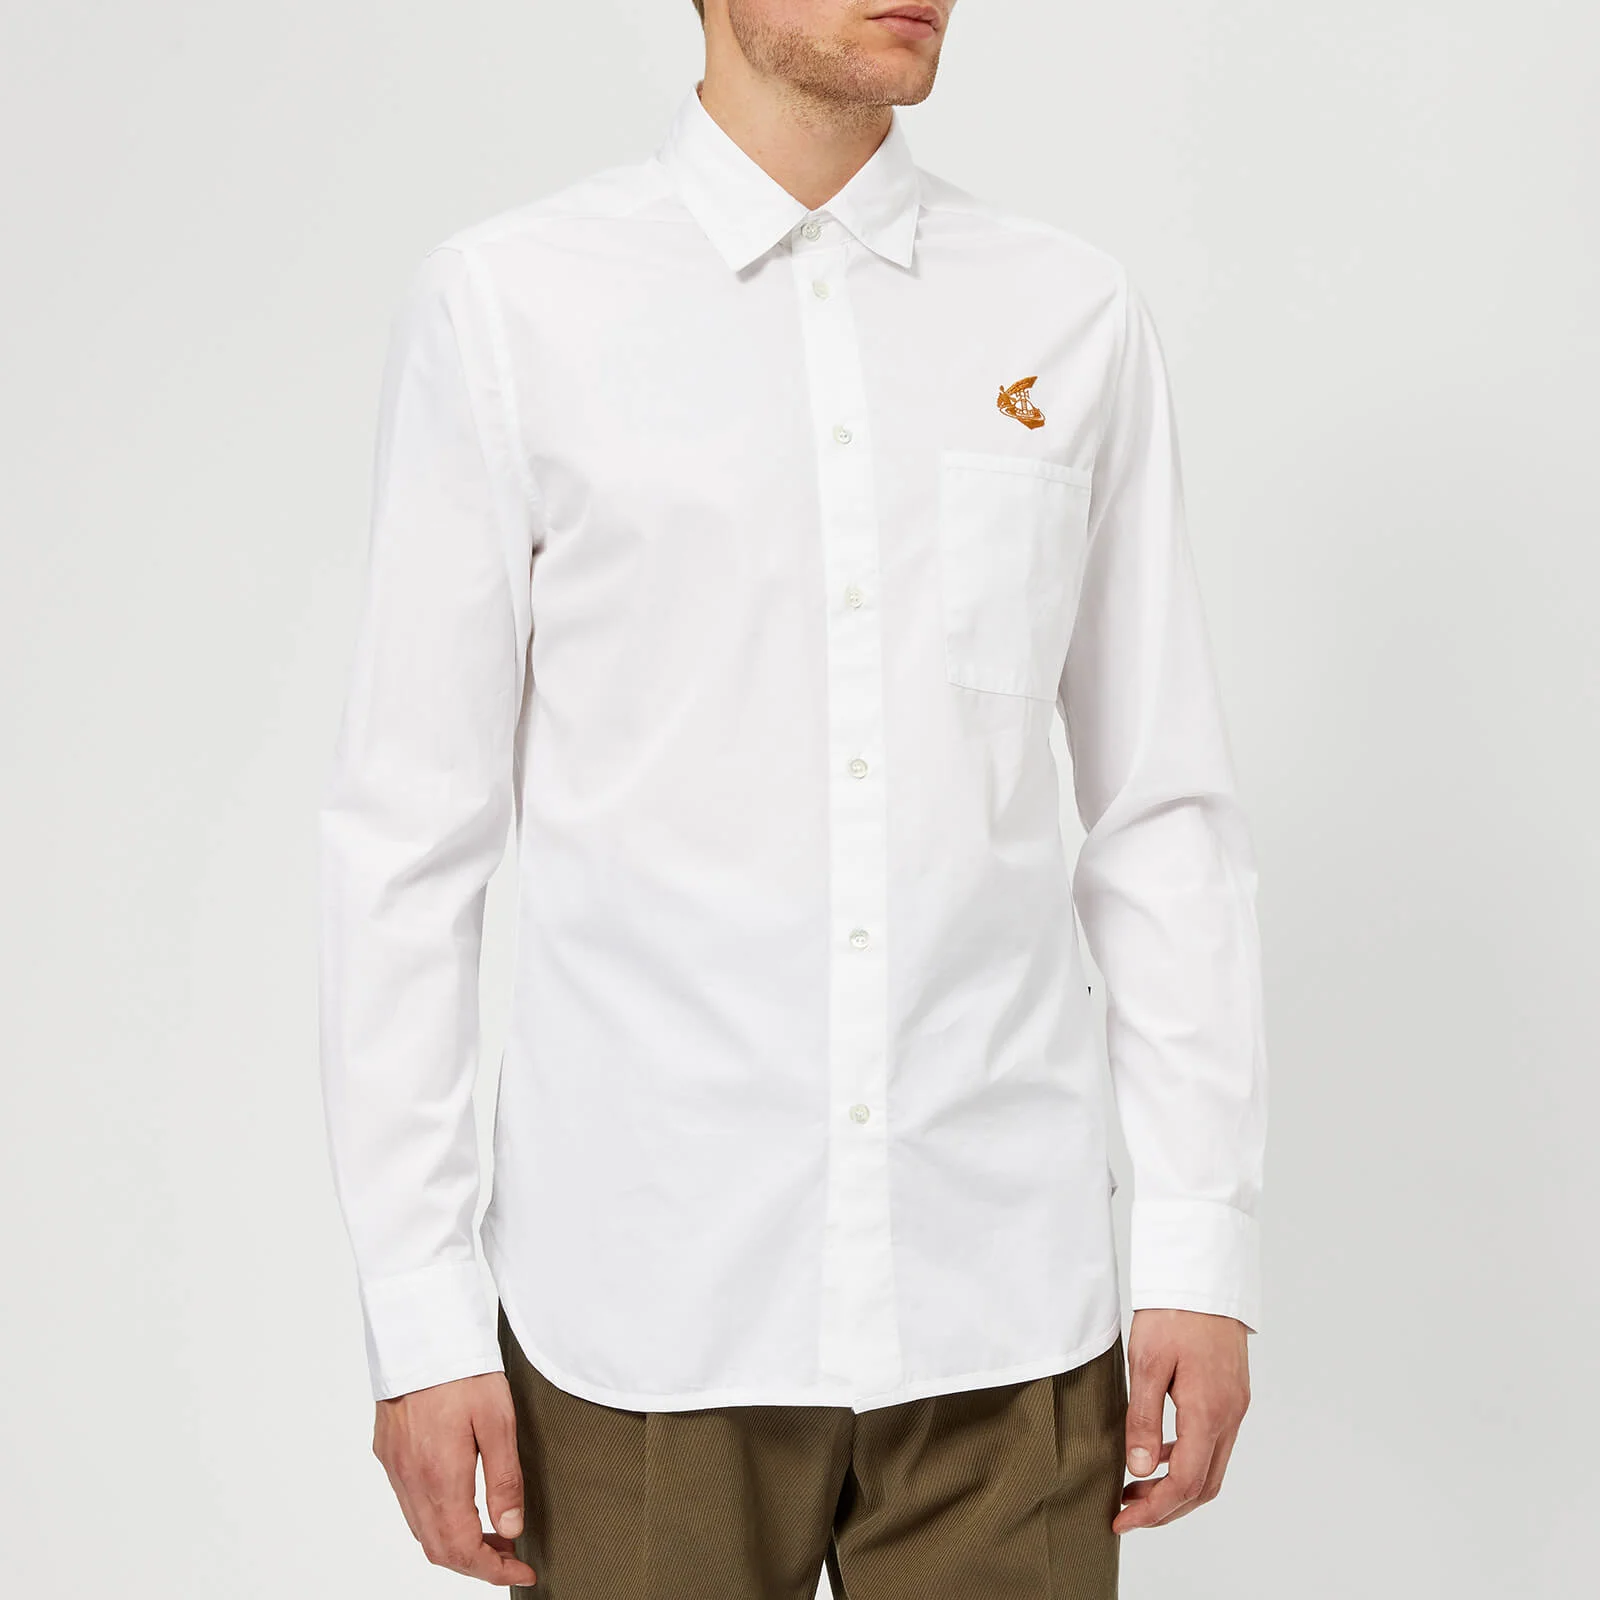 Vivienne Westwood Anglomania Men's Classic Shirt - White Image 1